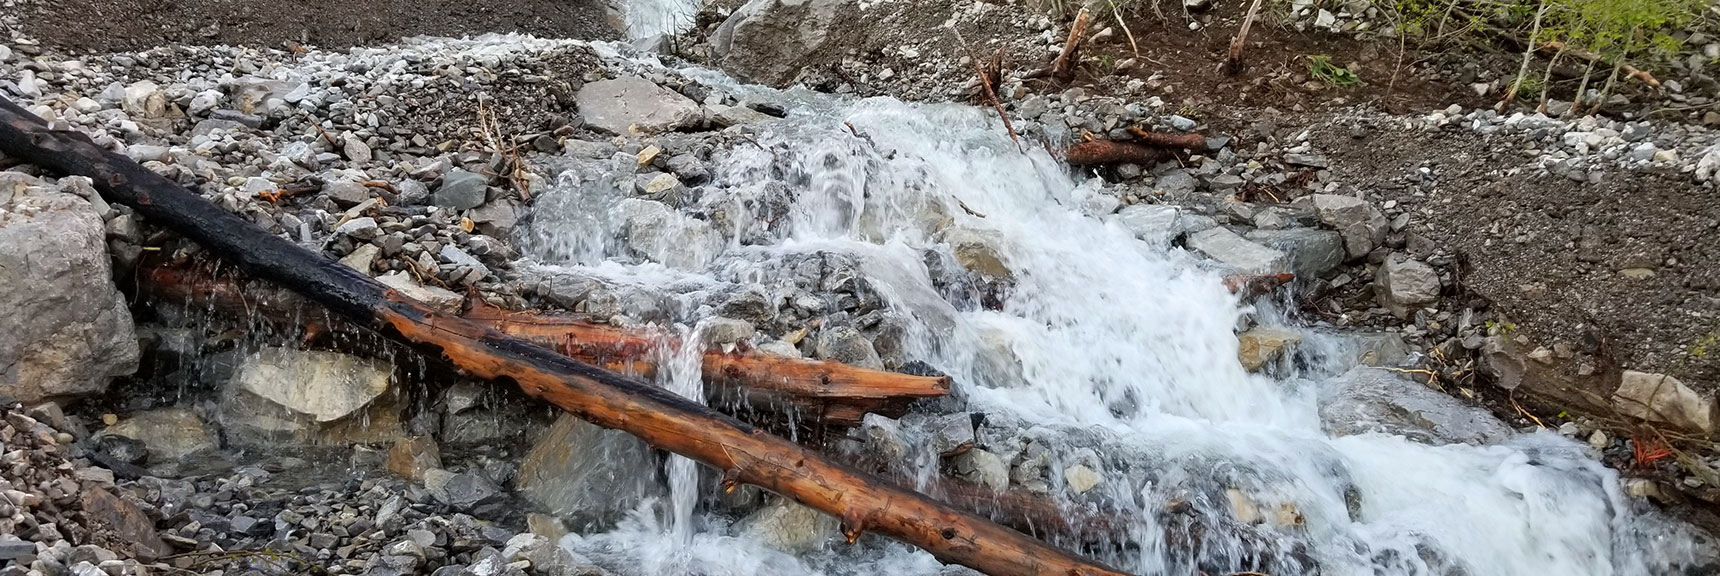 Spring Runoff Stream on South Climb Trail to Griffith Peak and Mt. Charleston